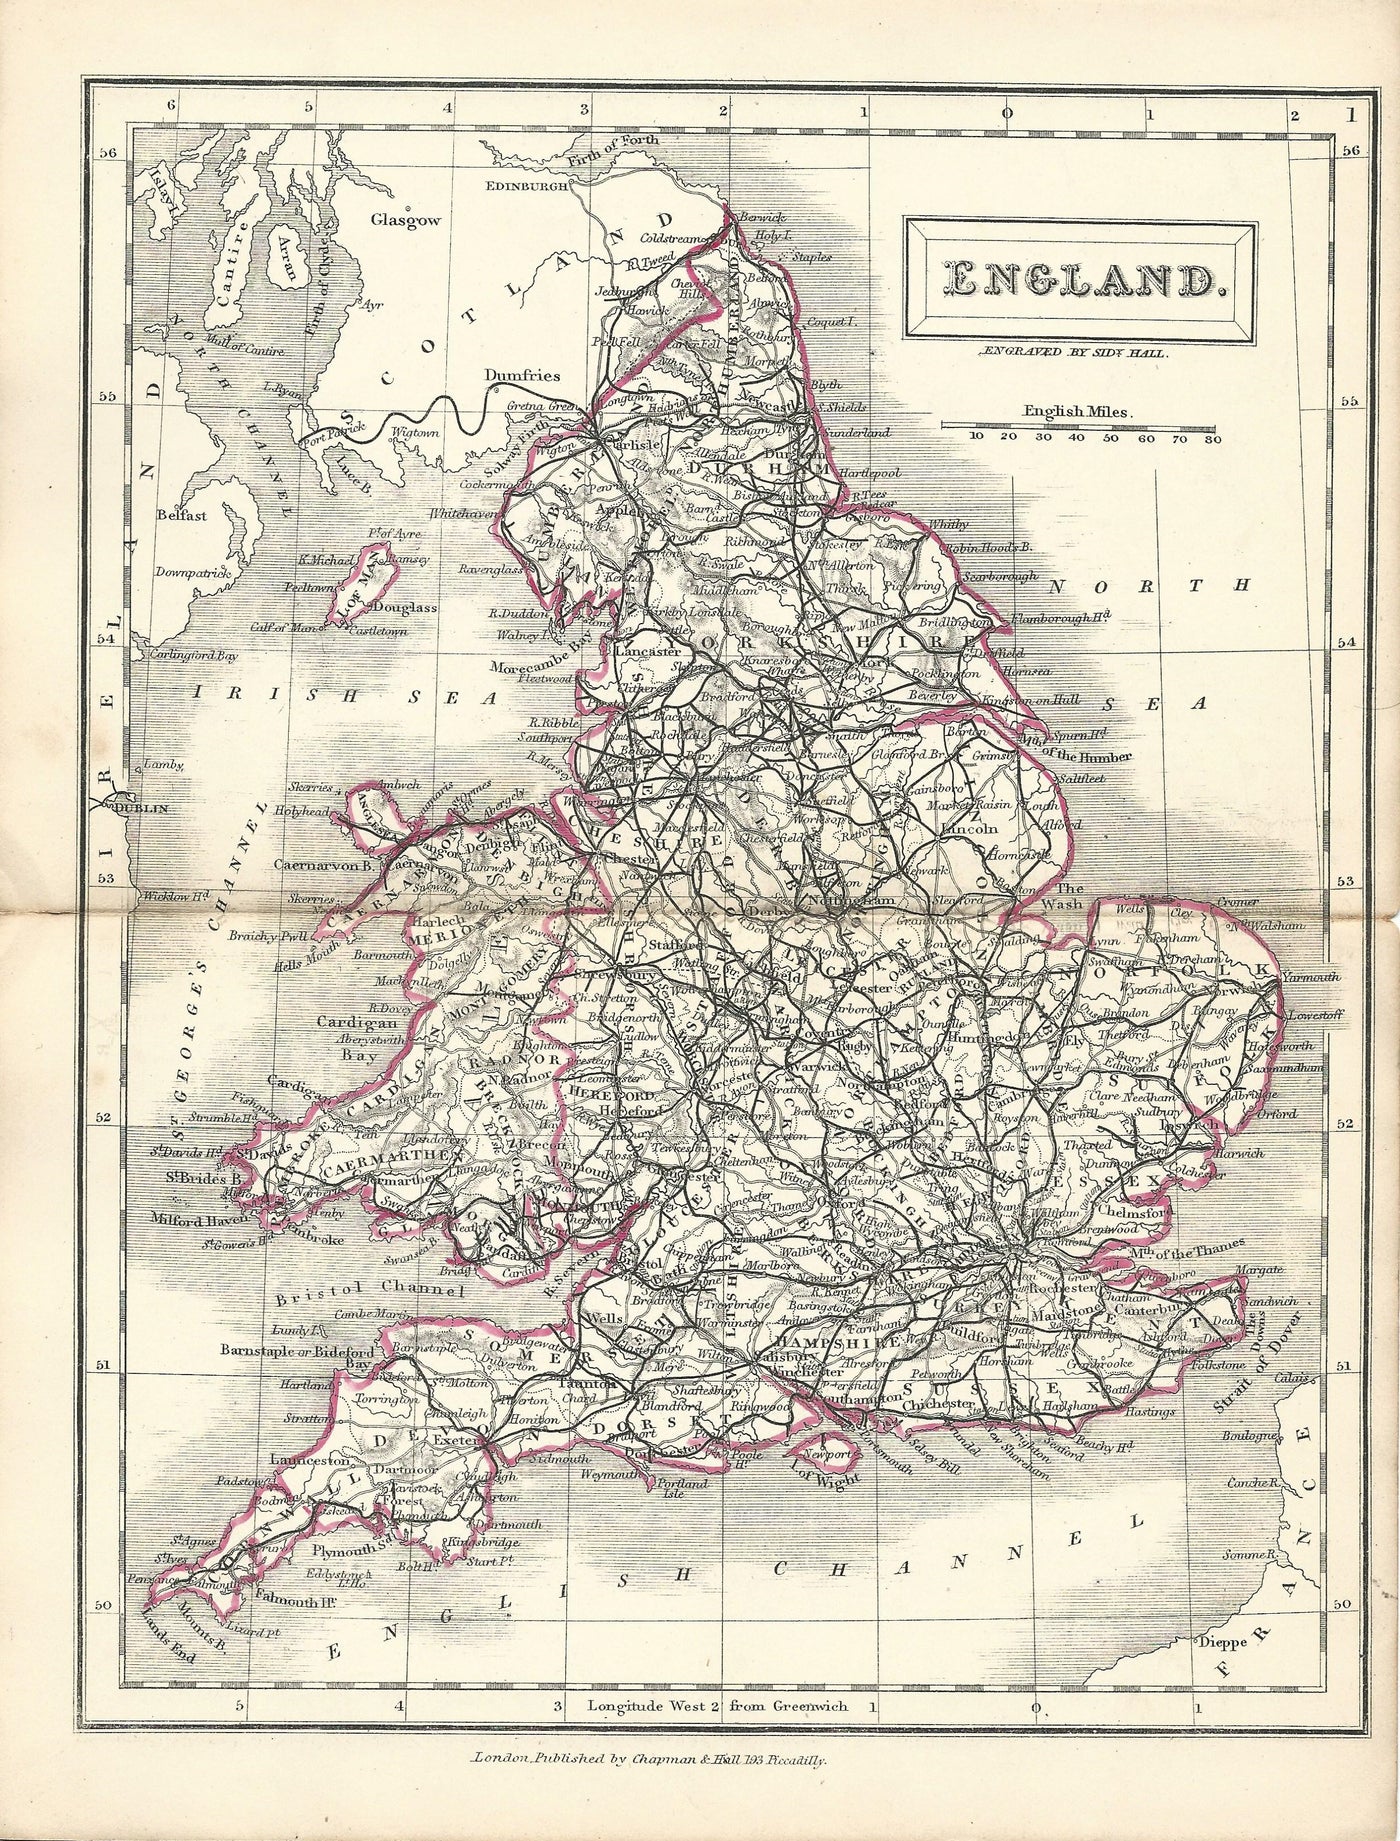 England steel engraved antique map of the English counties by Sidney Hall published 1860